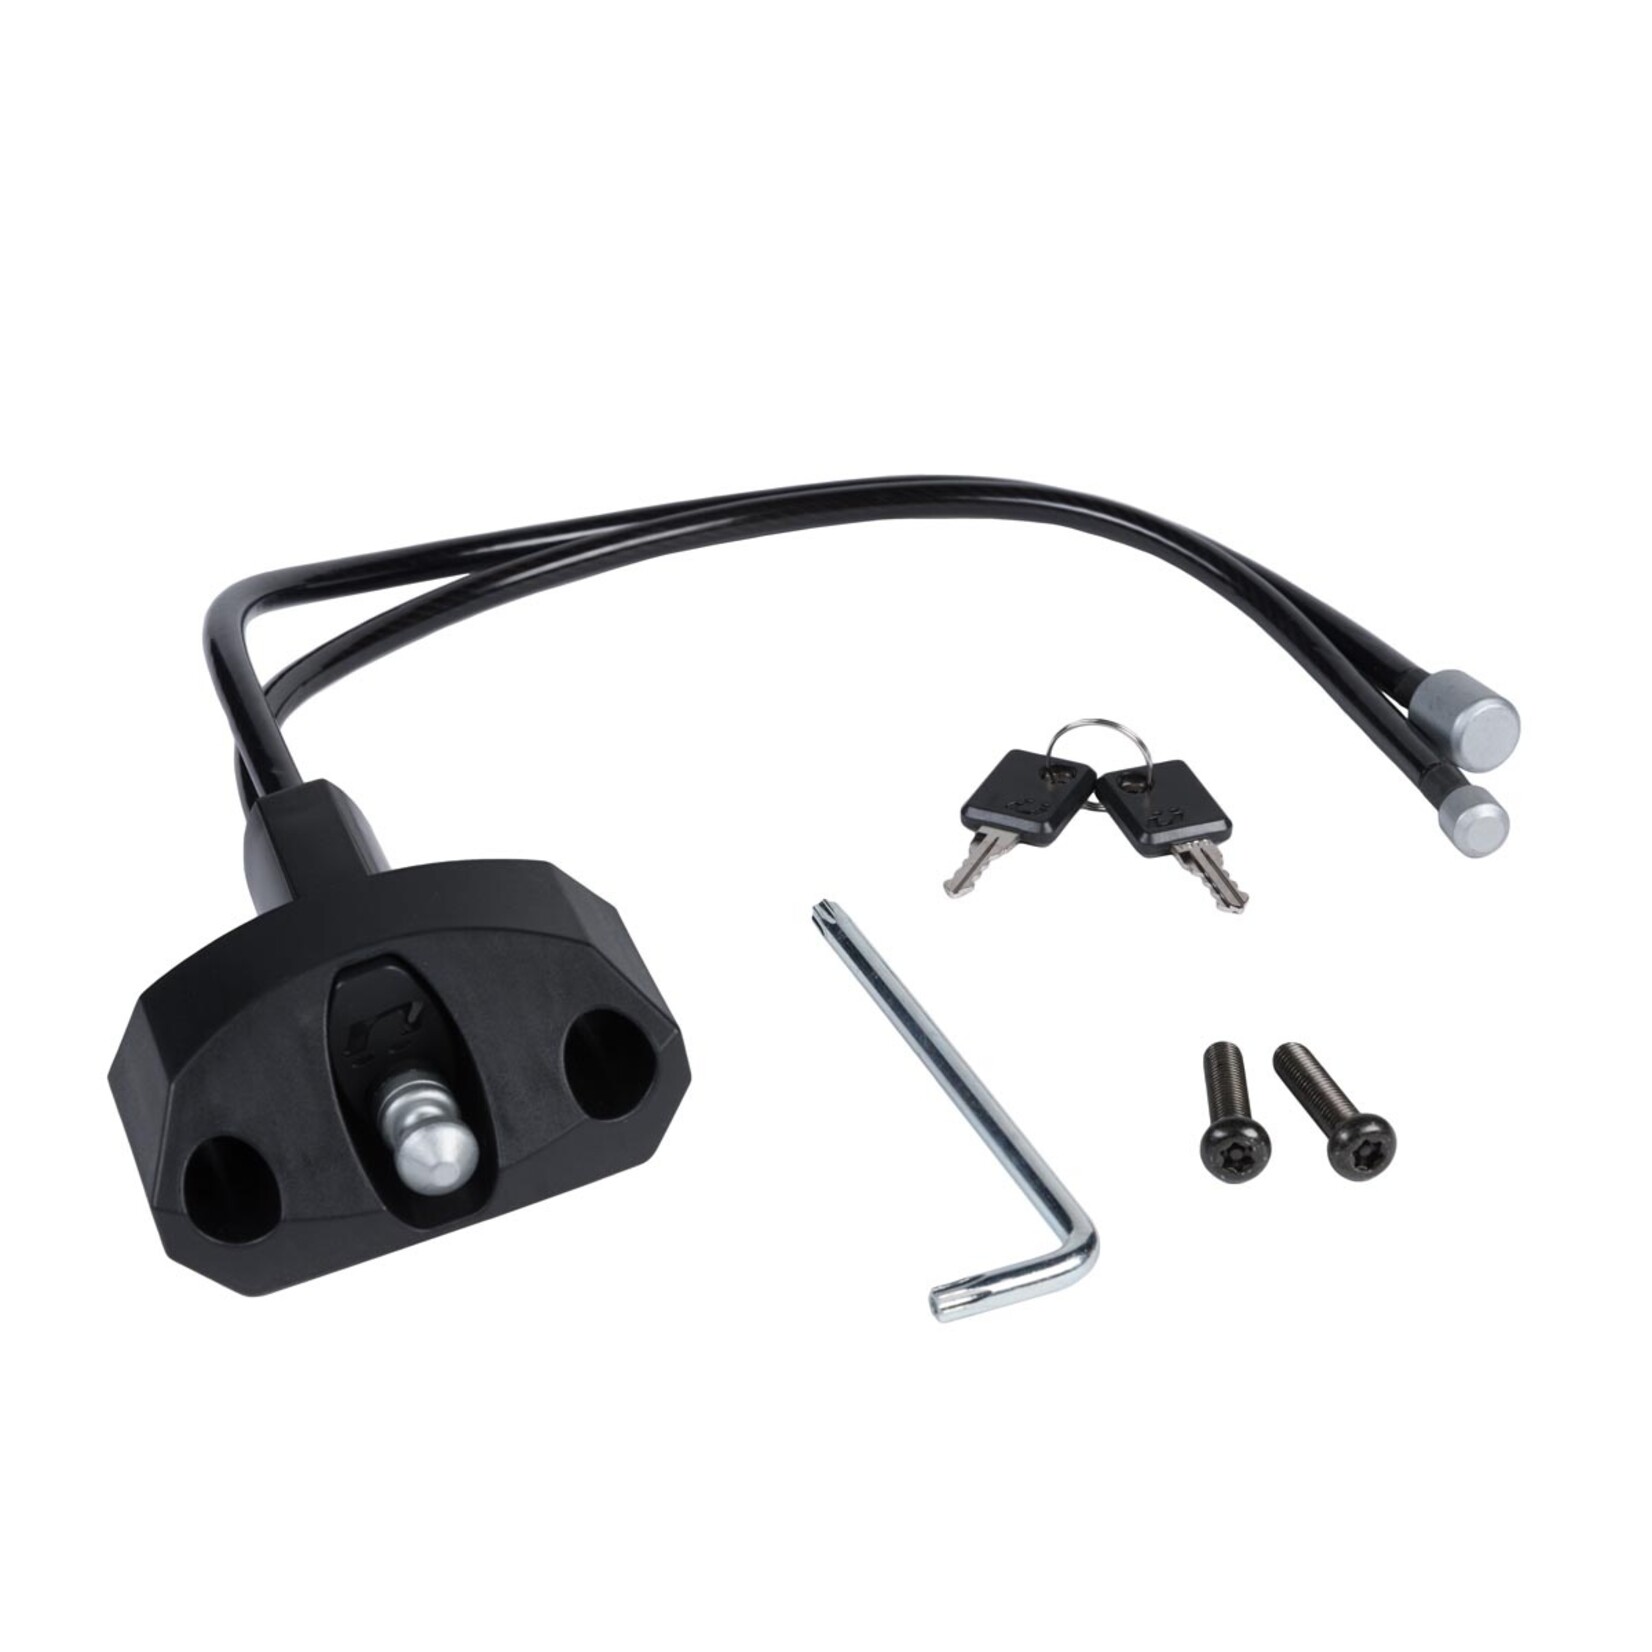 Kuat Lock Cable for NV 2.0 (Keyed)